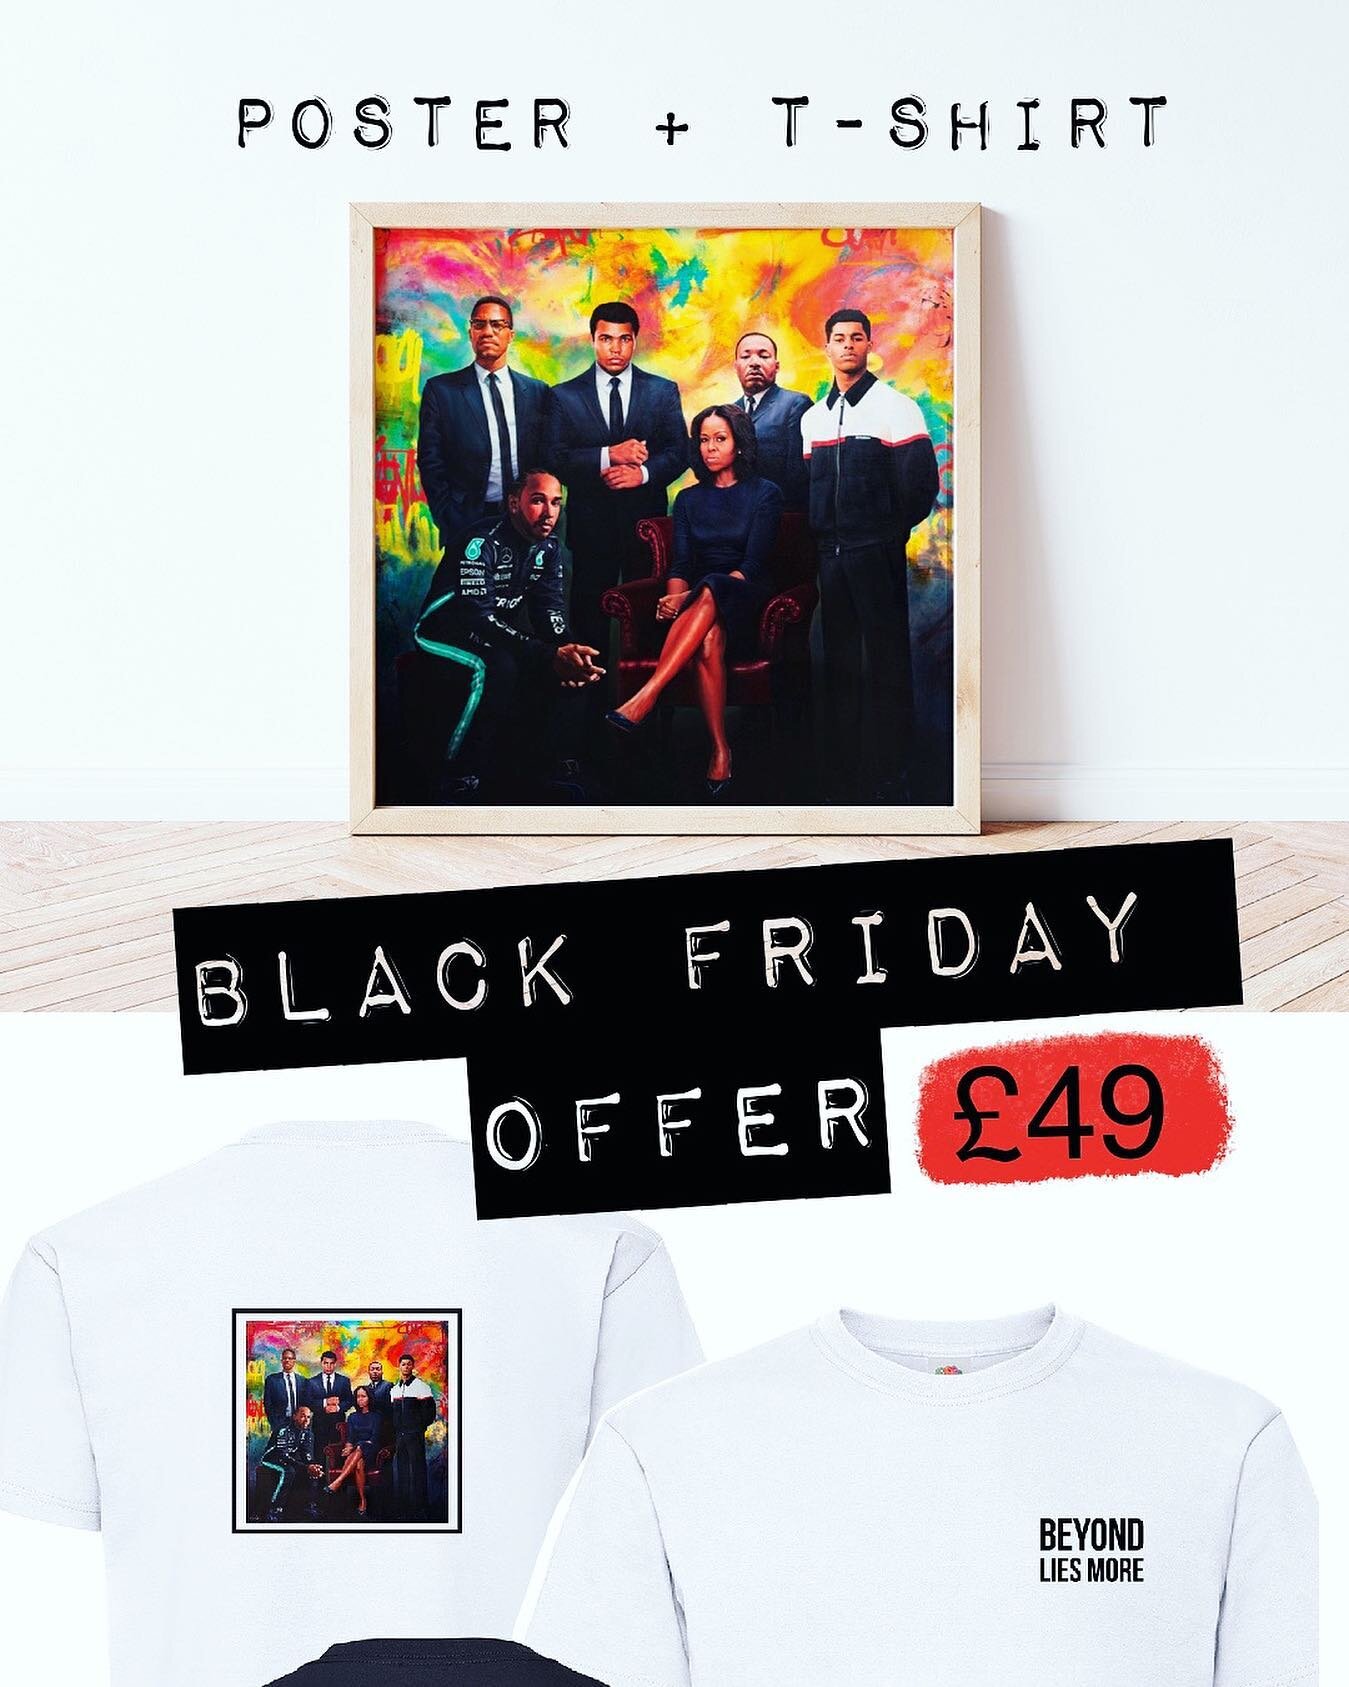 You will no doubt be inundated with Black Friday offers by now but just in case you don&rsquo;t see our stories, here&rsquo;s a post to share our Black Friday/Cyber Monday offer: Beyond Lies More Poster and Tee bundle.
20% of sales will still go to c